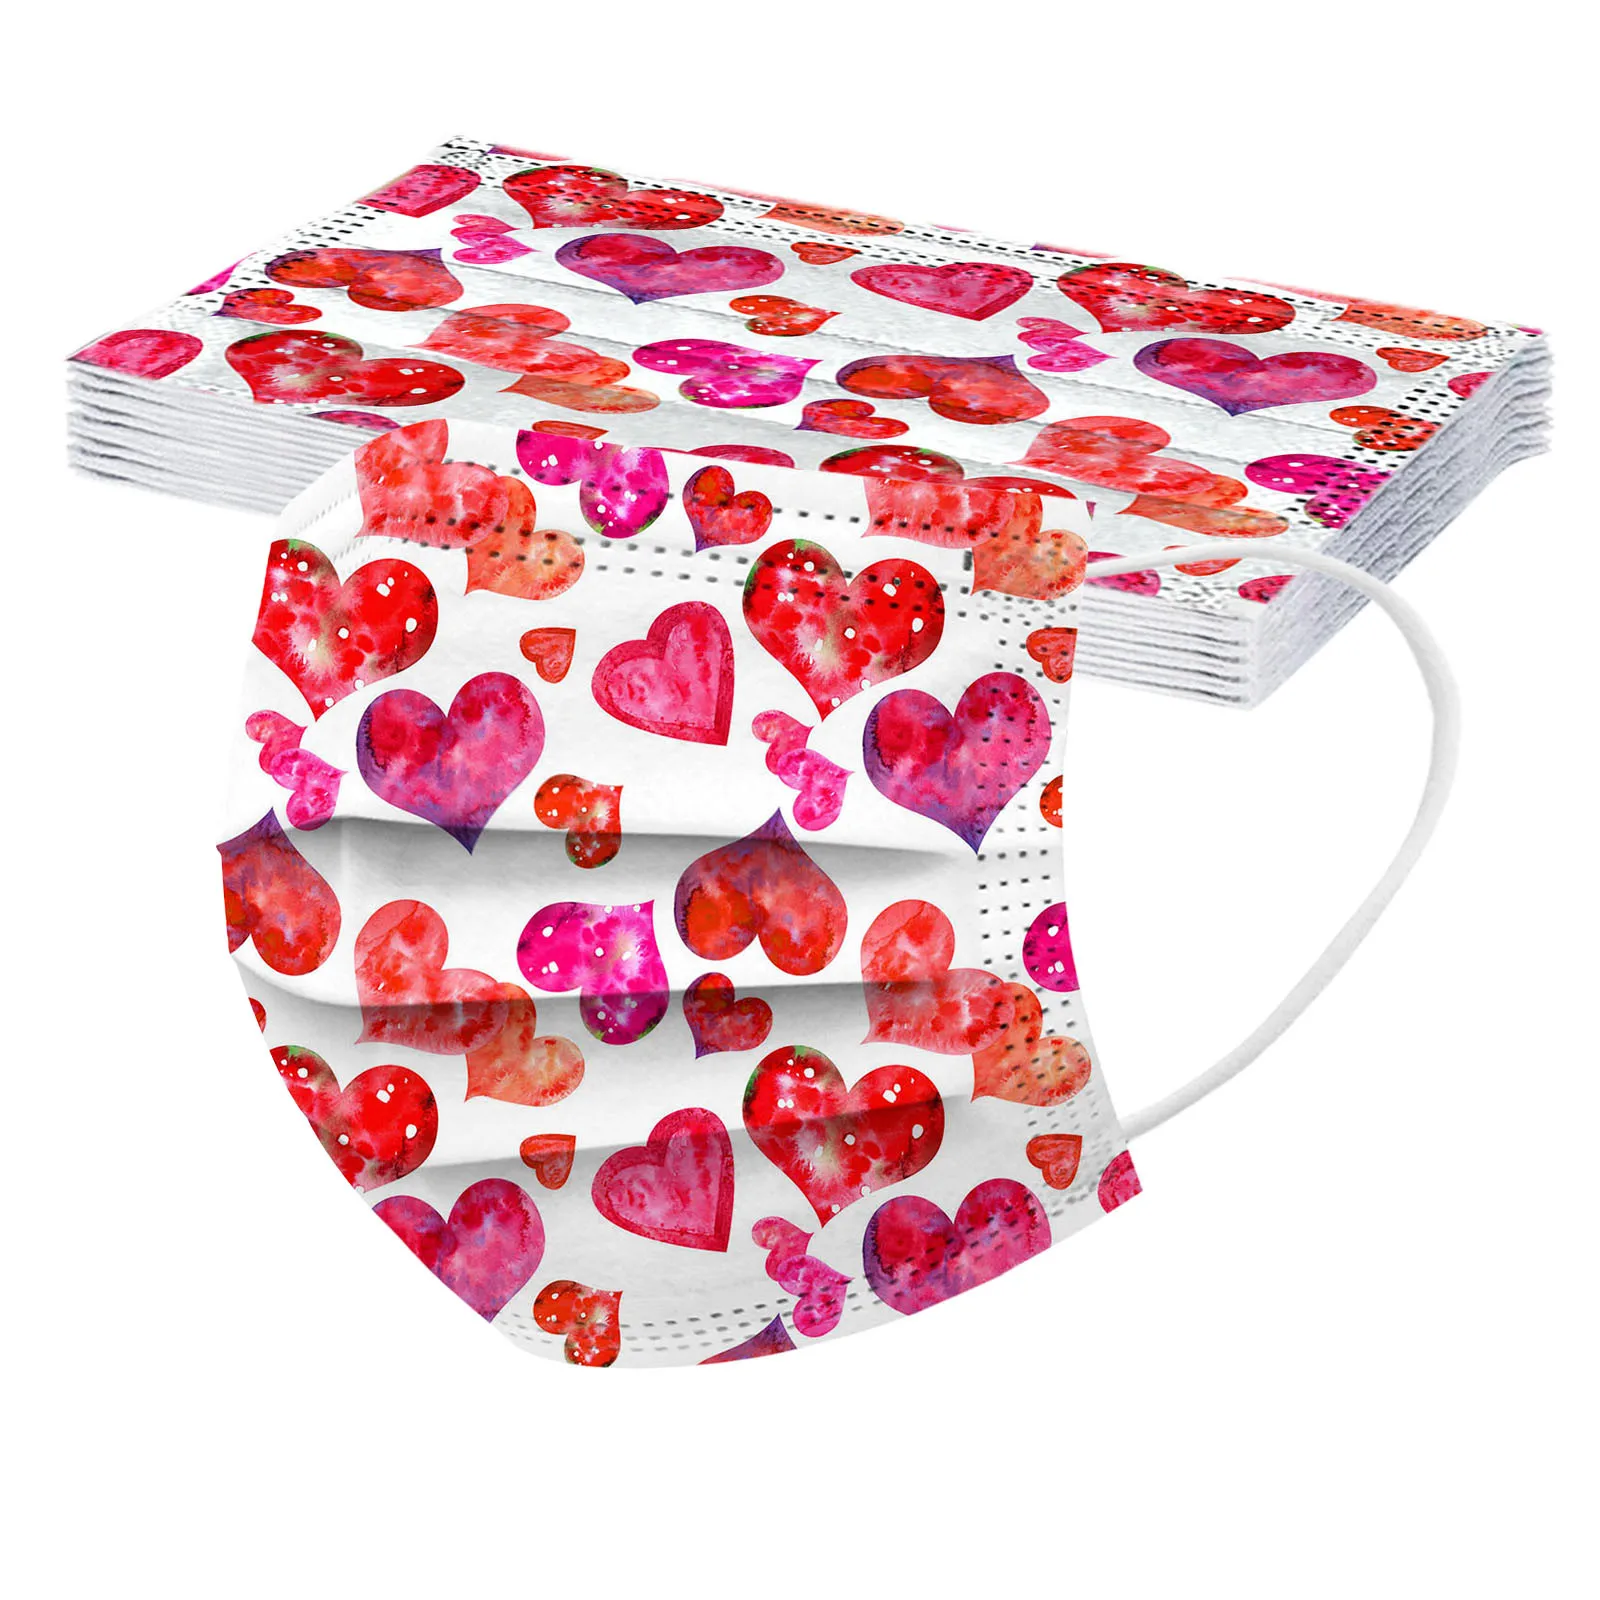 

10pc Heart-shaped Printed Masks Adult Valentine's Day Print Disposable Face Mask 3ply Dustproof Filter Pm2.5 Earloop Bandage